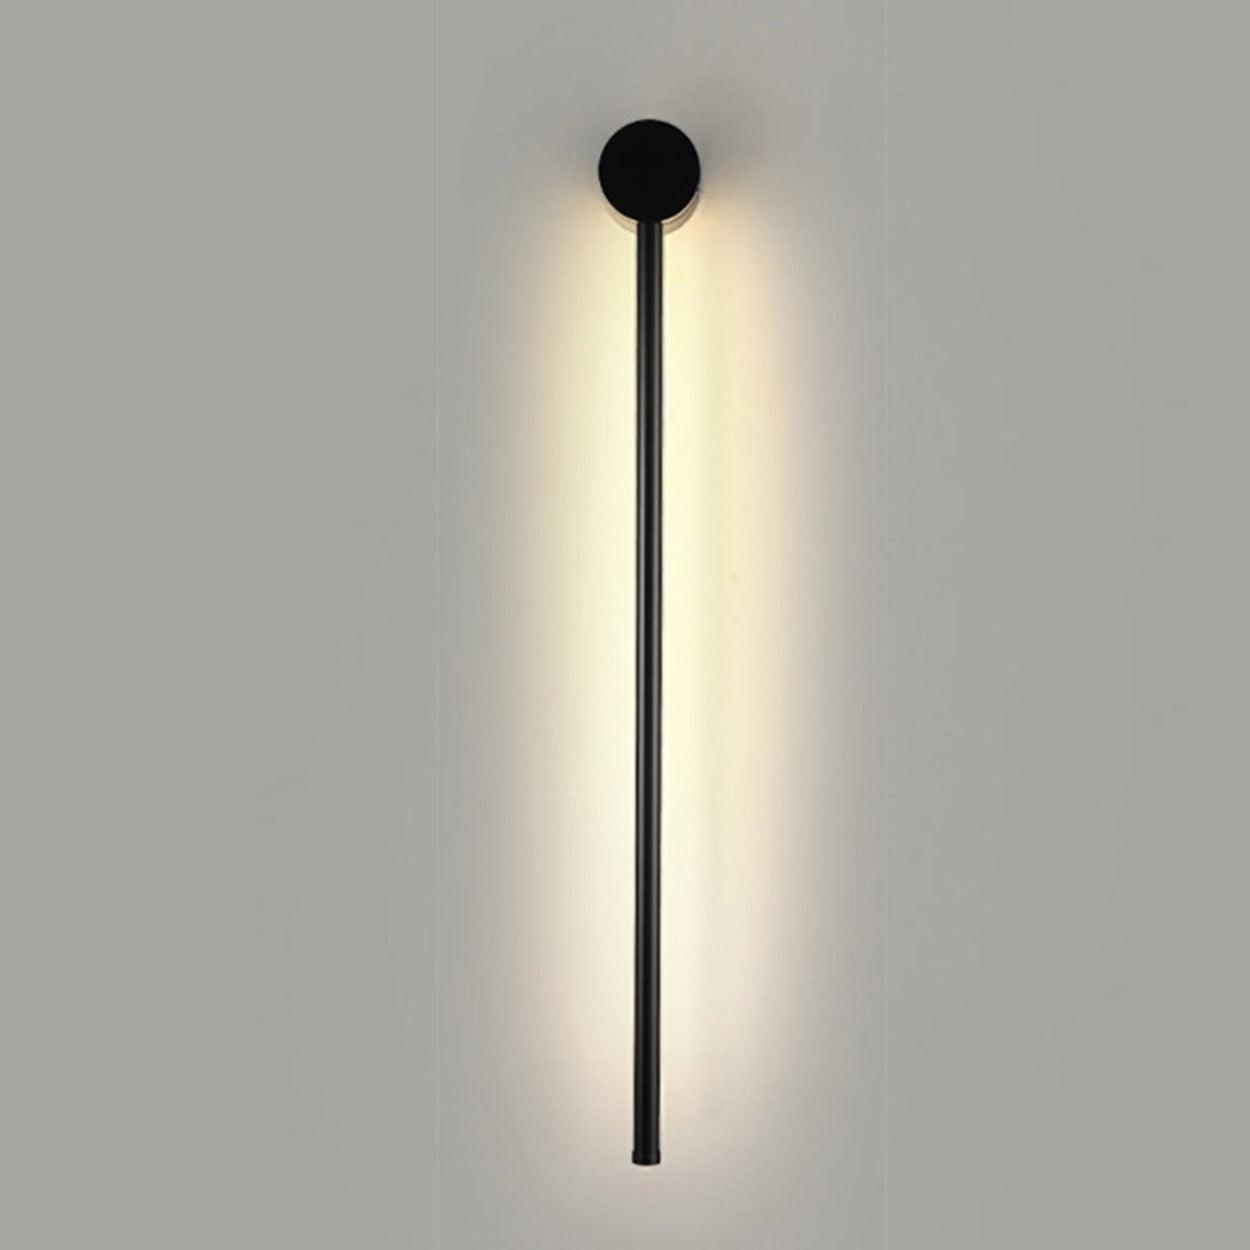 ANKUR ELLIS LINEAR CONTEMPORARY LED WALL LIGHT at the lowest price in India.